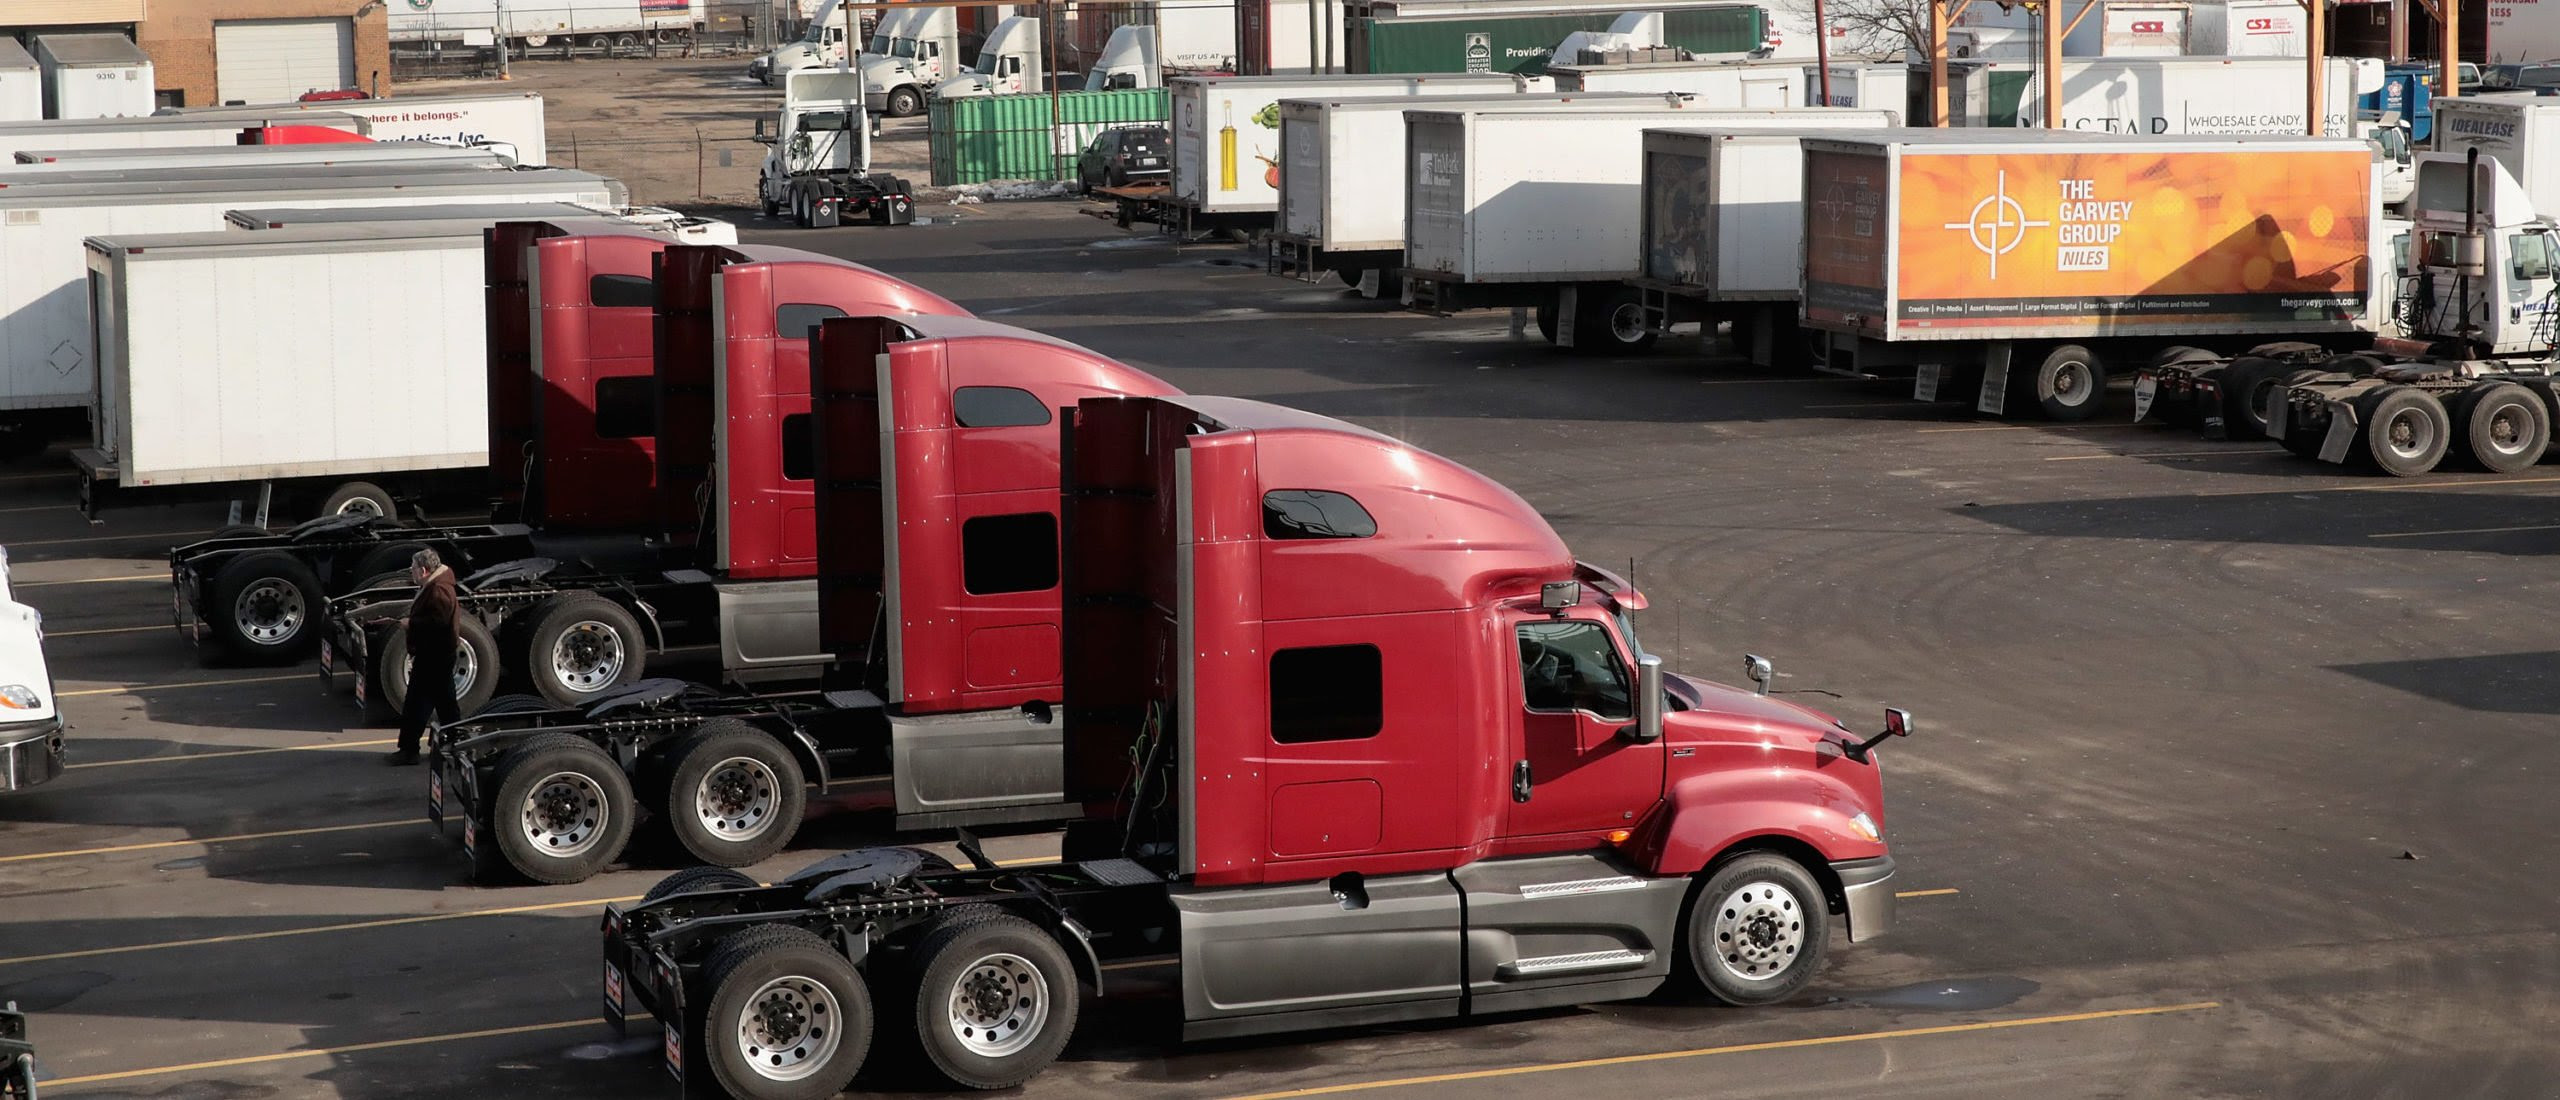 The EPA’s Latest Regulation Could Devastate The Trucking Industry